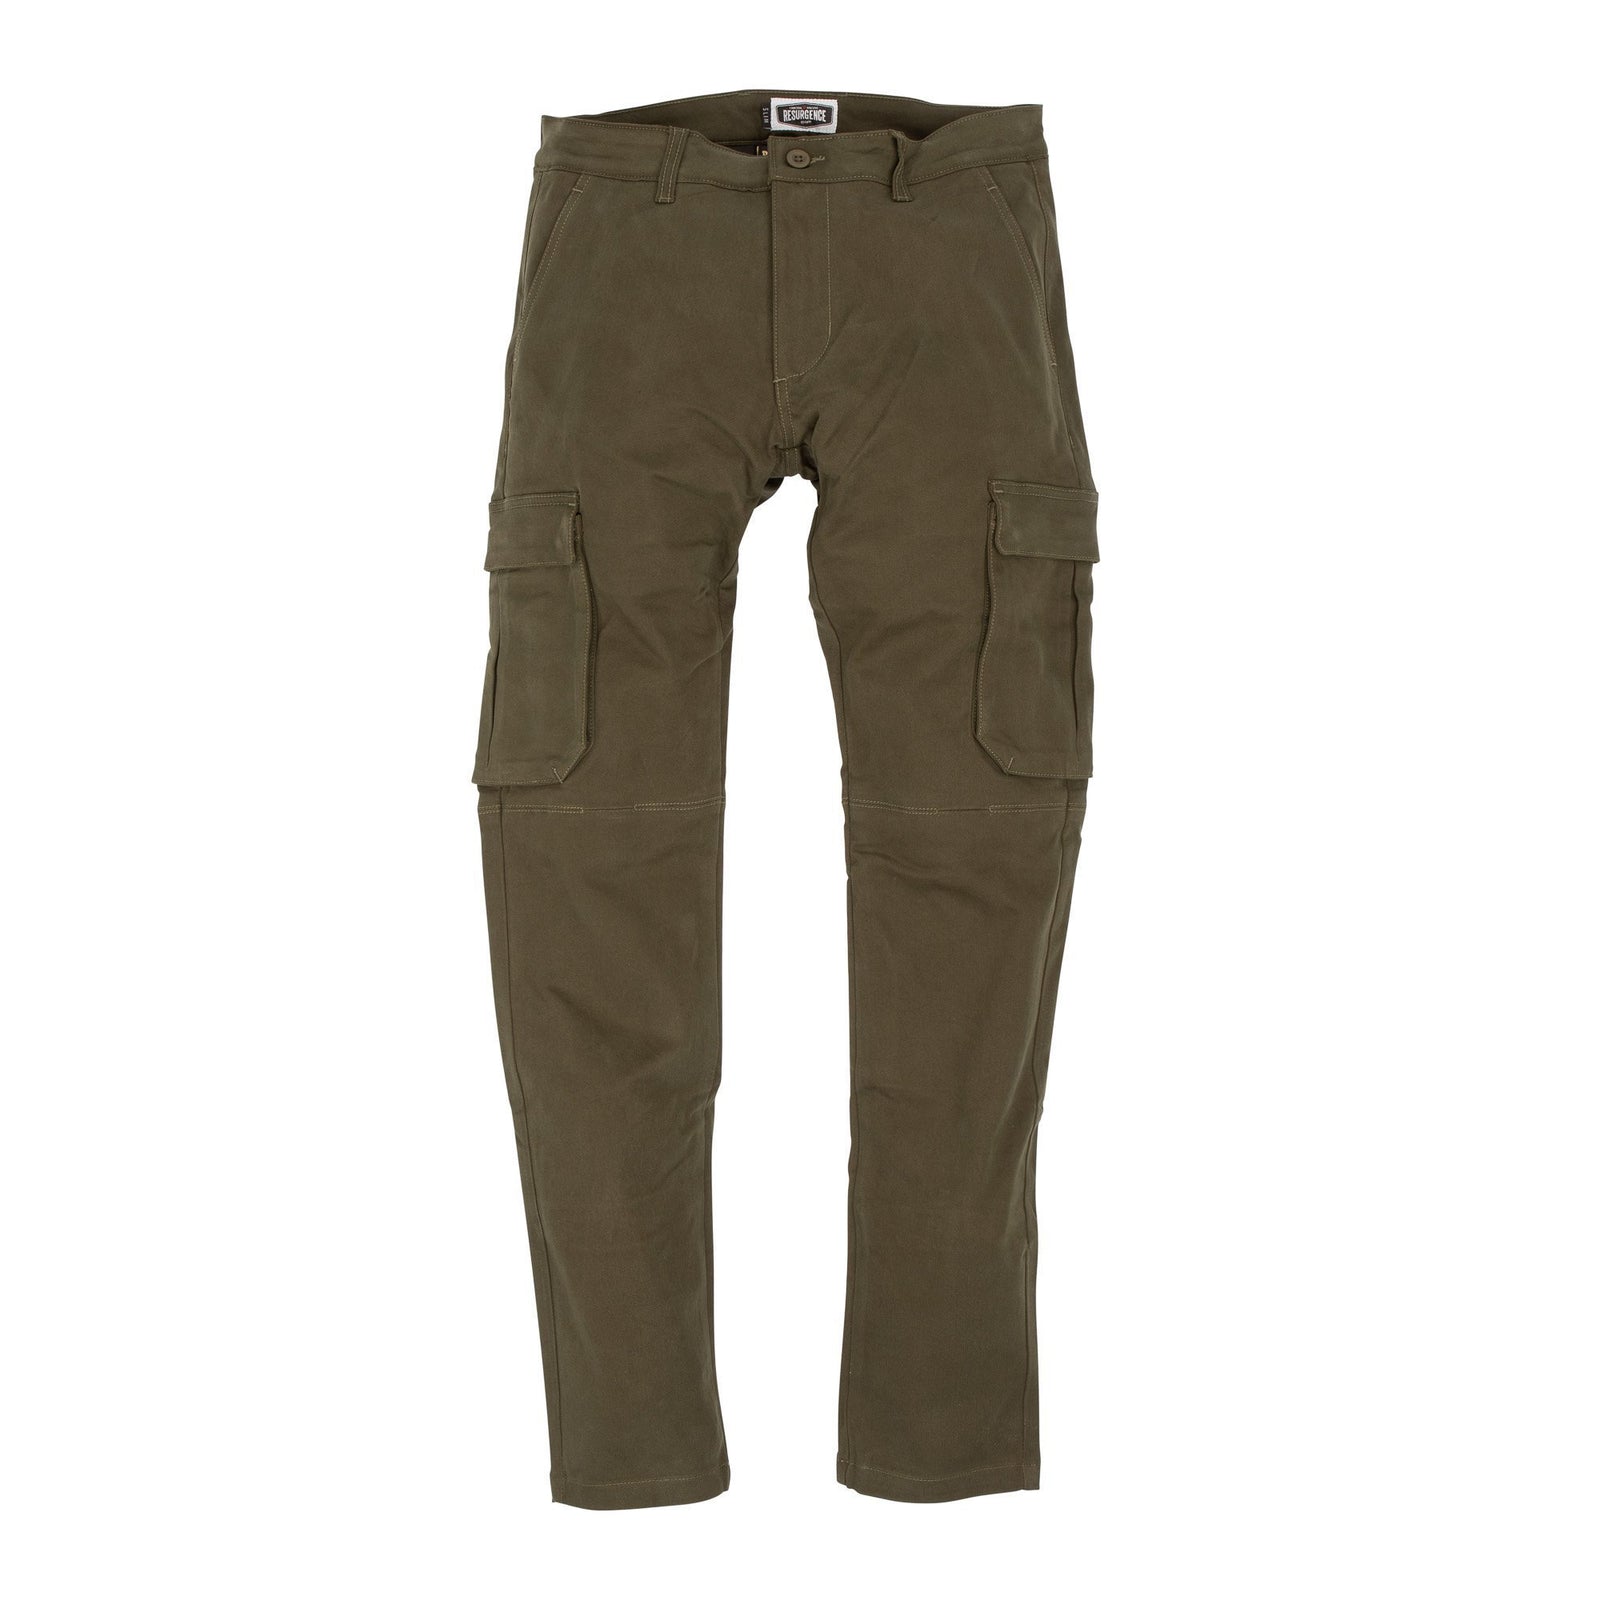 Motorcycle Cargo Pants (Grey) - 8.17 Seconds Slide-time (Highest Ever)